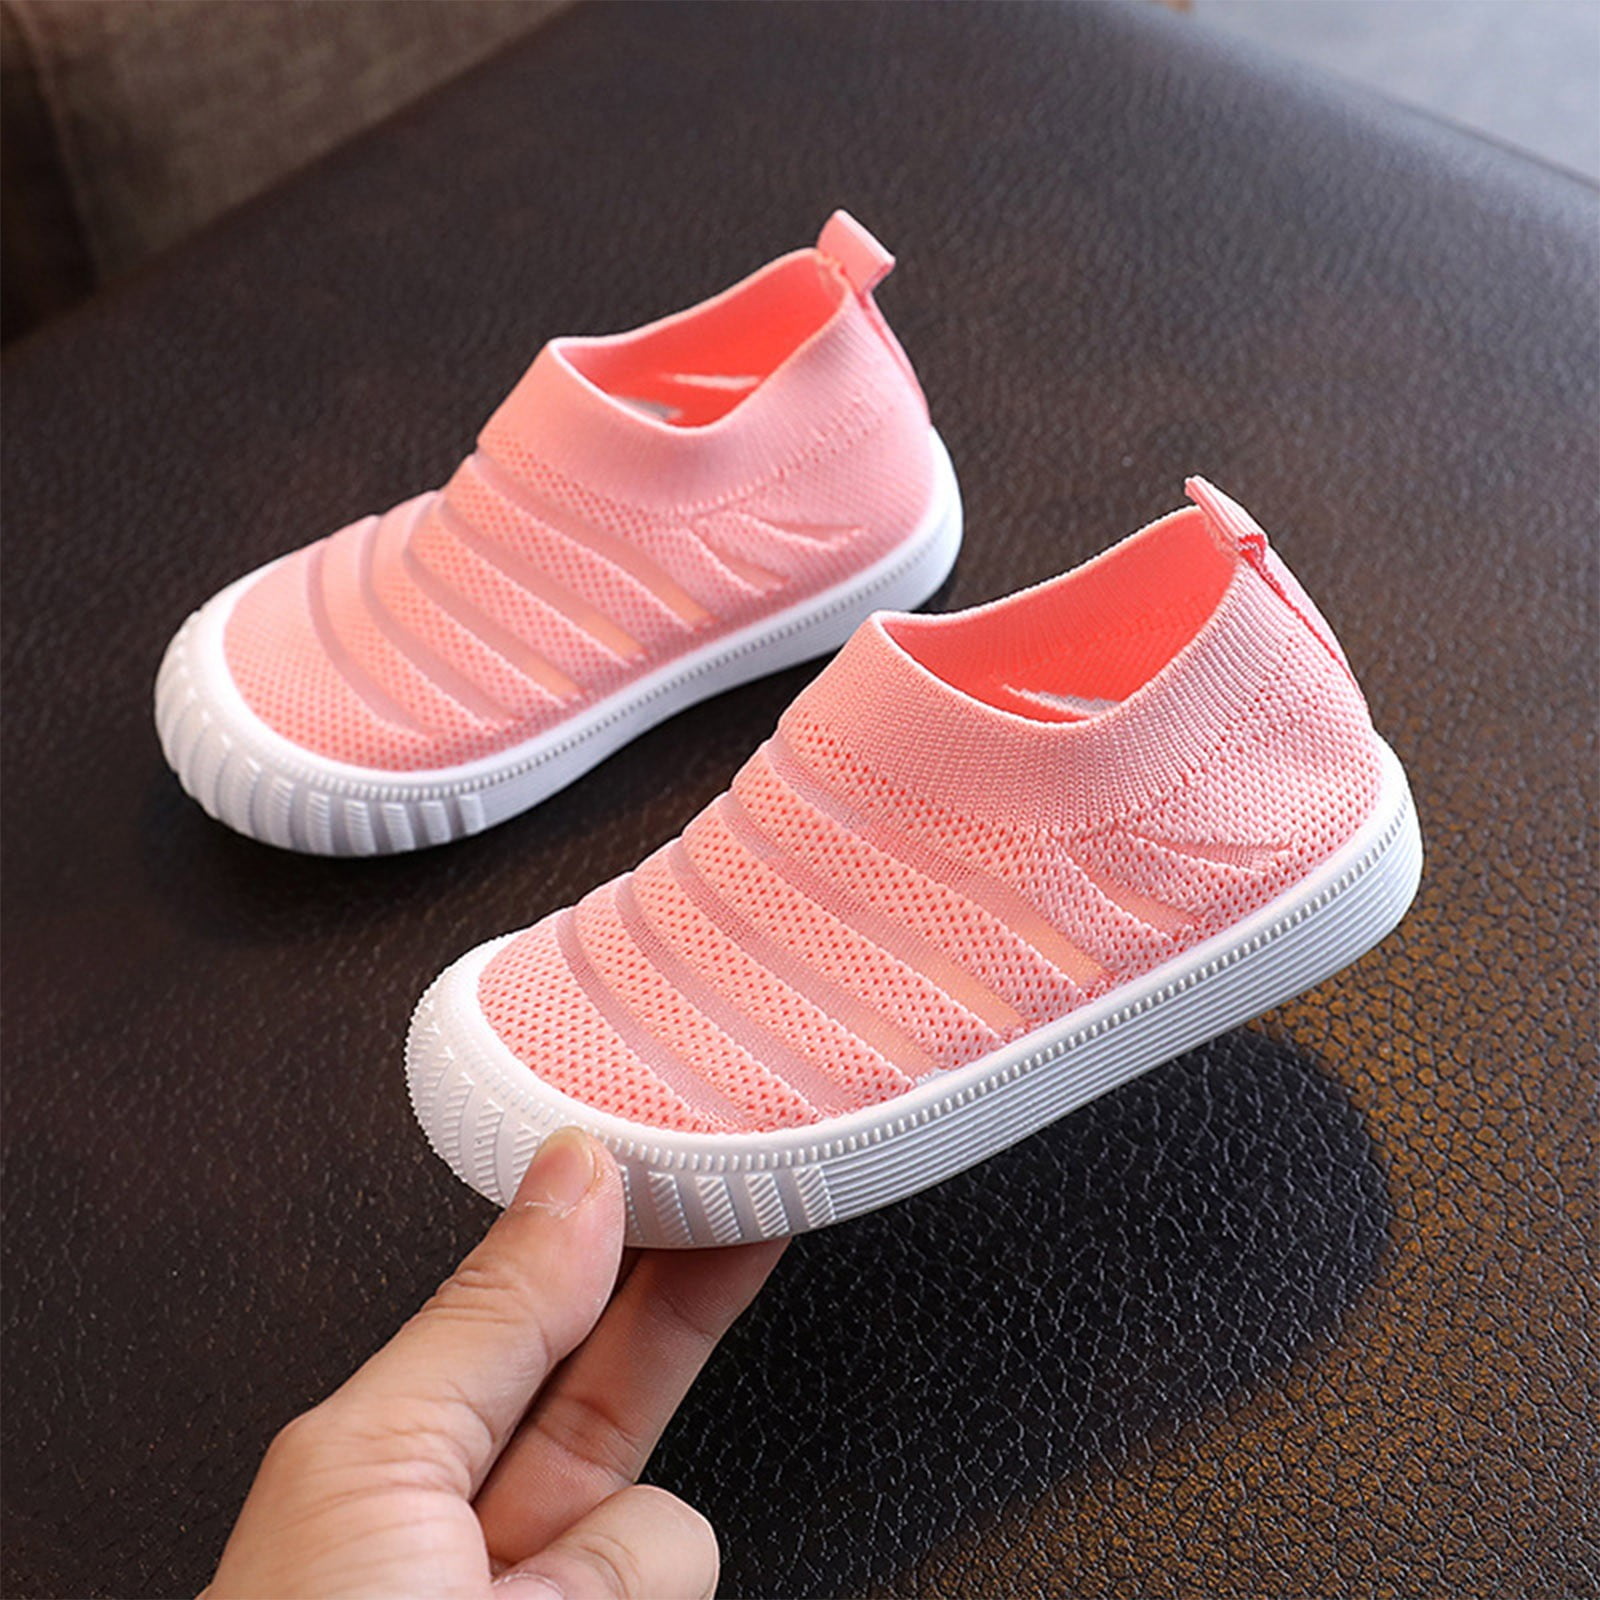 Summer Savings Clearance UMfun Women's Fashion Slip-On Sneakers,  Rhinestones Glitter Shoes For Women, Platform Loafers Cute Bowknot Flat  Casual Shoes For GirlsPink - Walmart.com